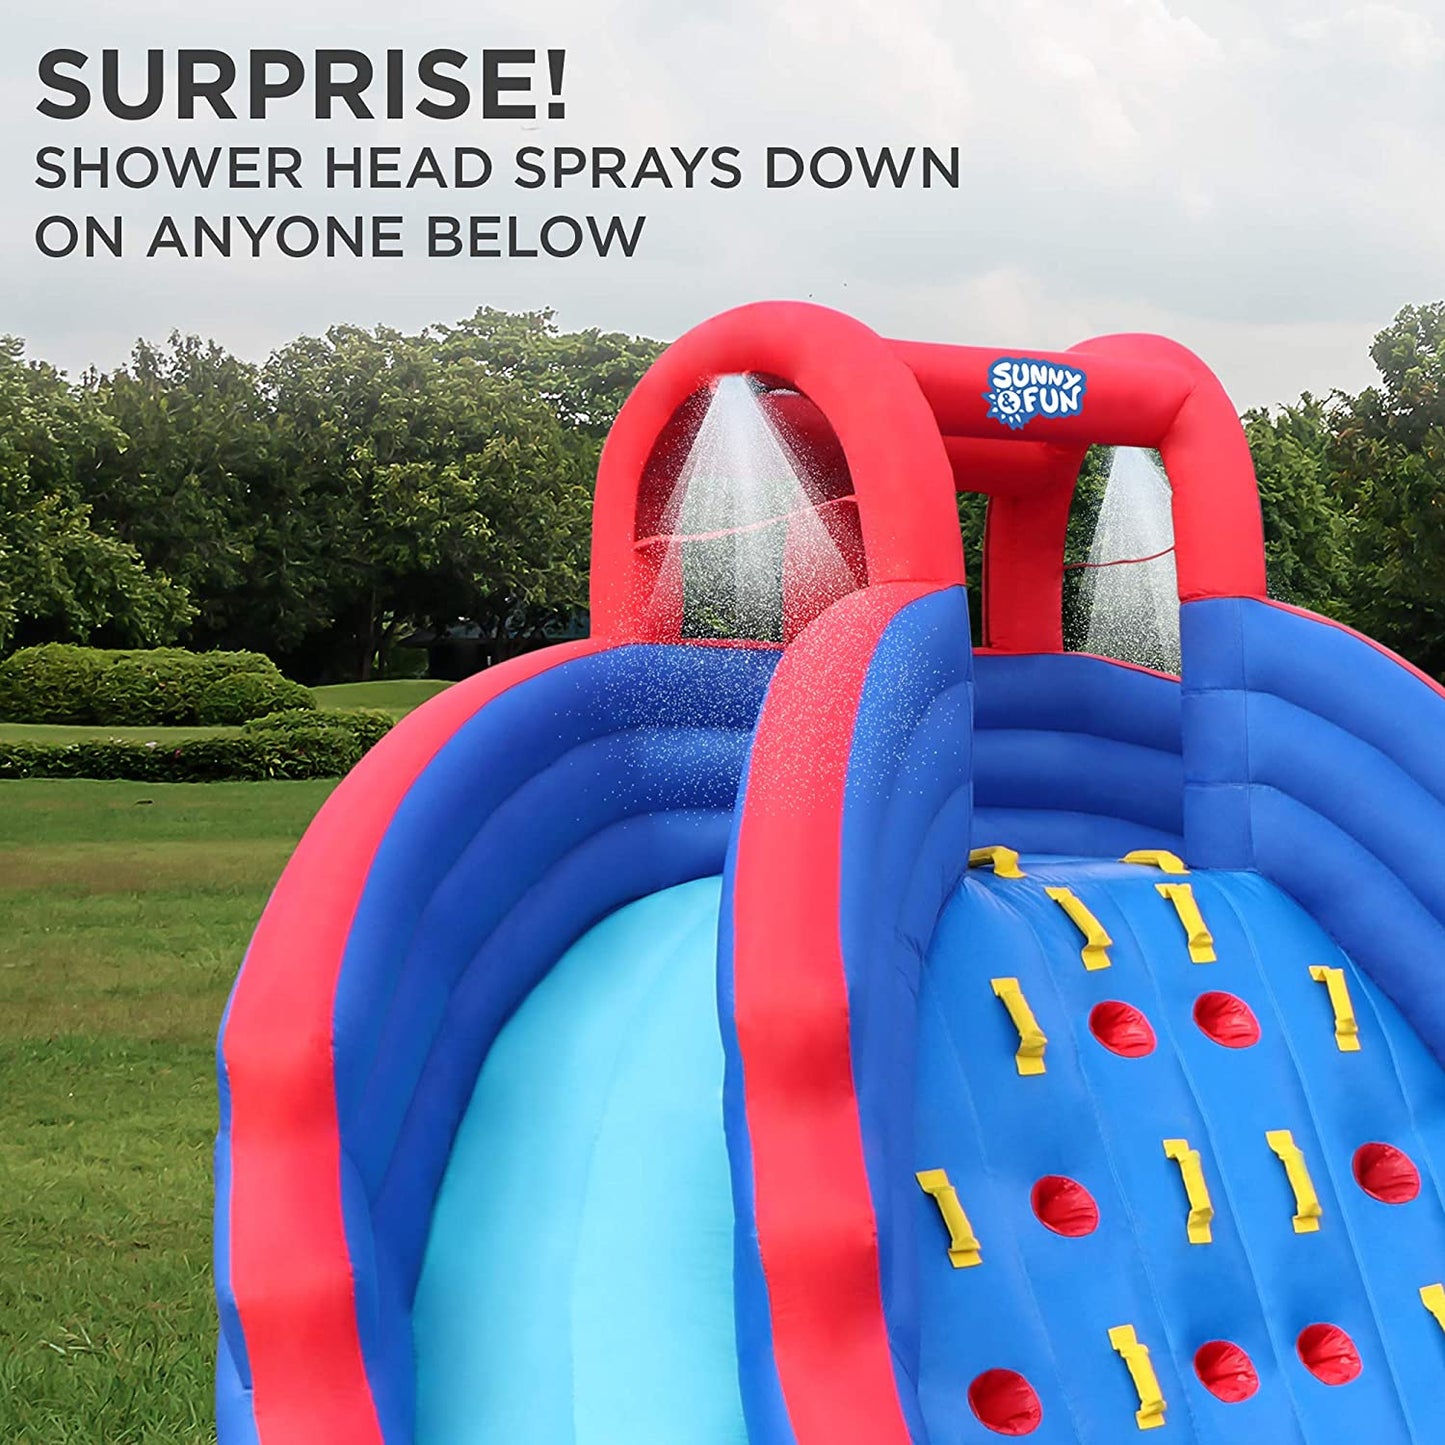 Ultra Climber Inflatable Water Slide Park – Heavy-Duty for Outdoor Fun - Climbing Wall, Two Slides & Splash Pool – Easy to Set up & Inflate with Included Air Pump & Carrying Case